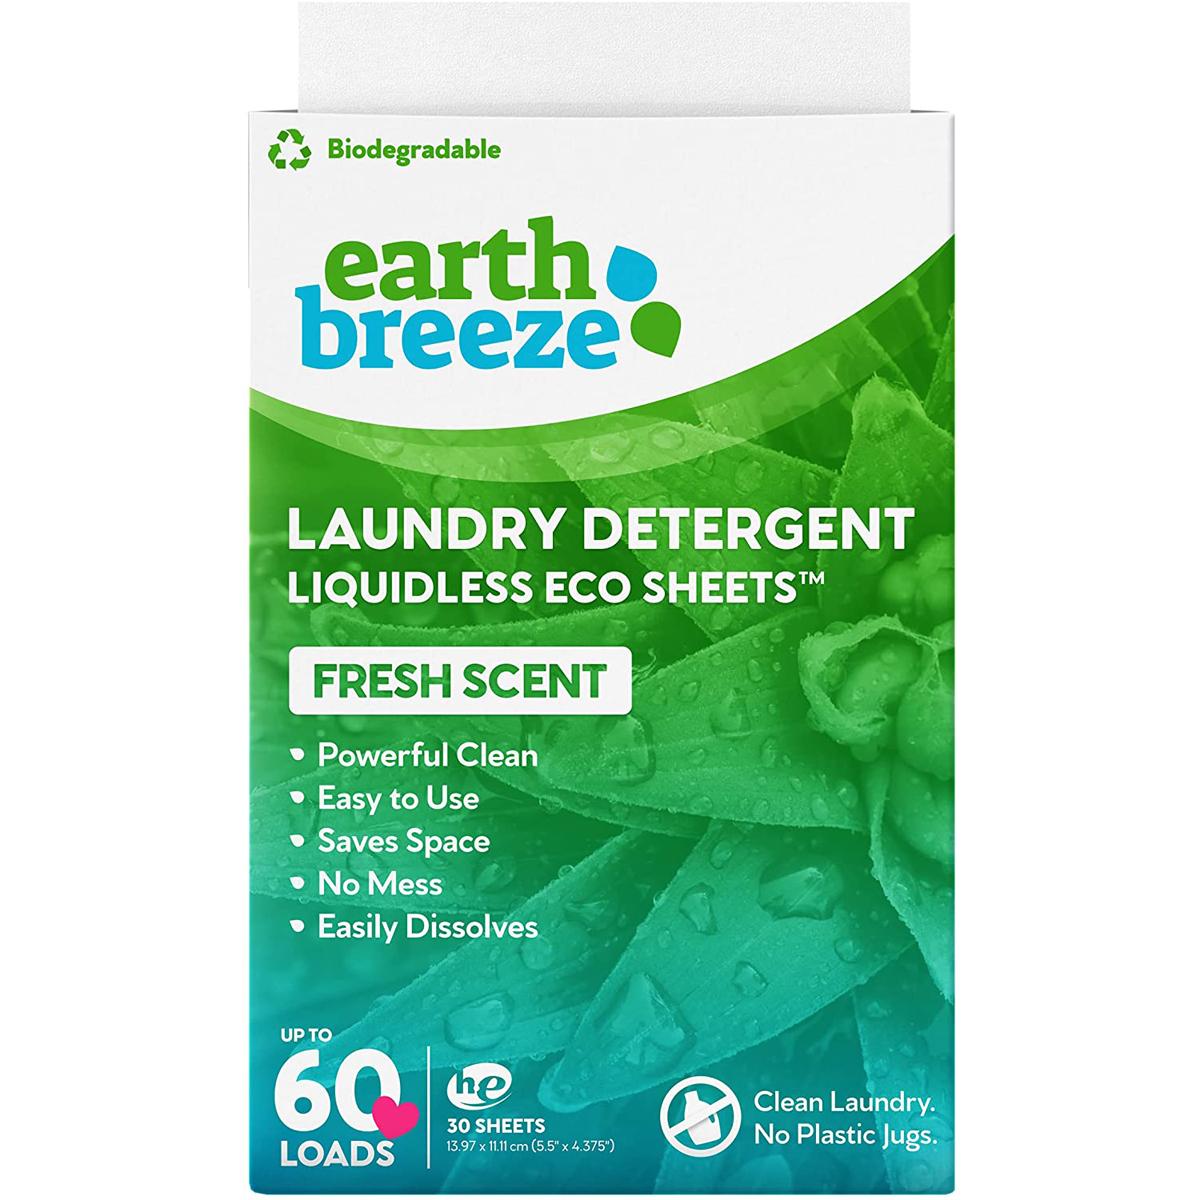 Earth Breeze Liquidless Laundry Detergent Sheets for $10.70 Shipped